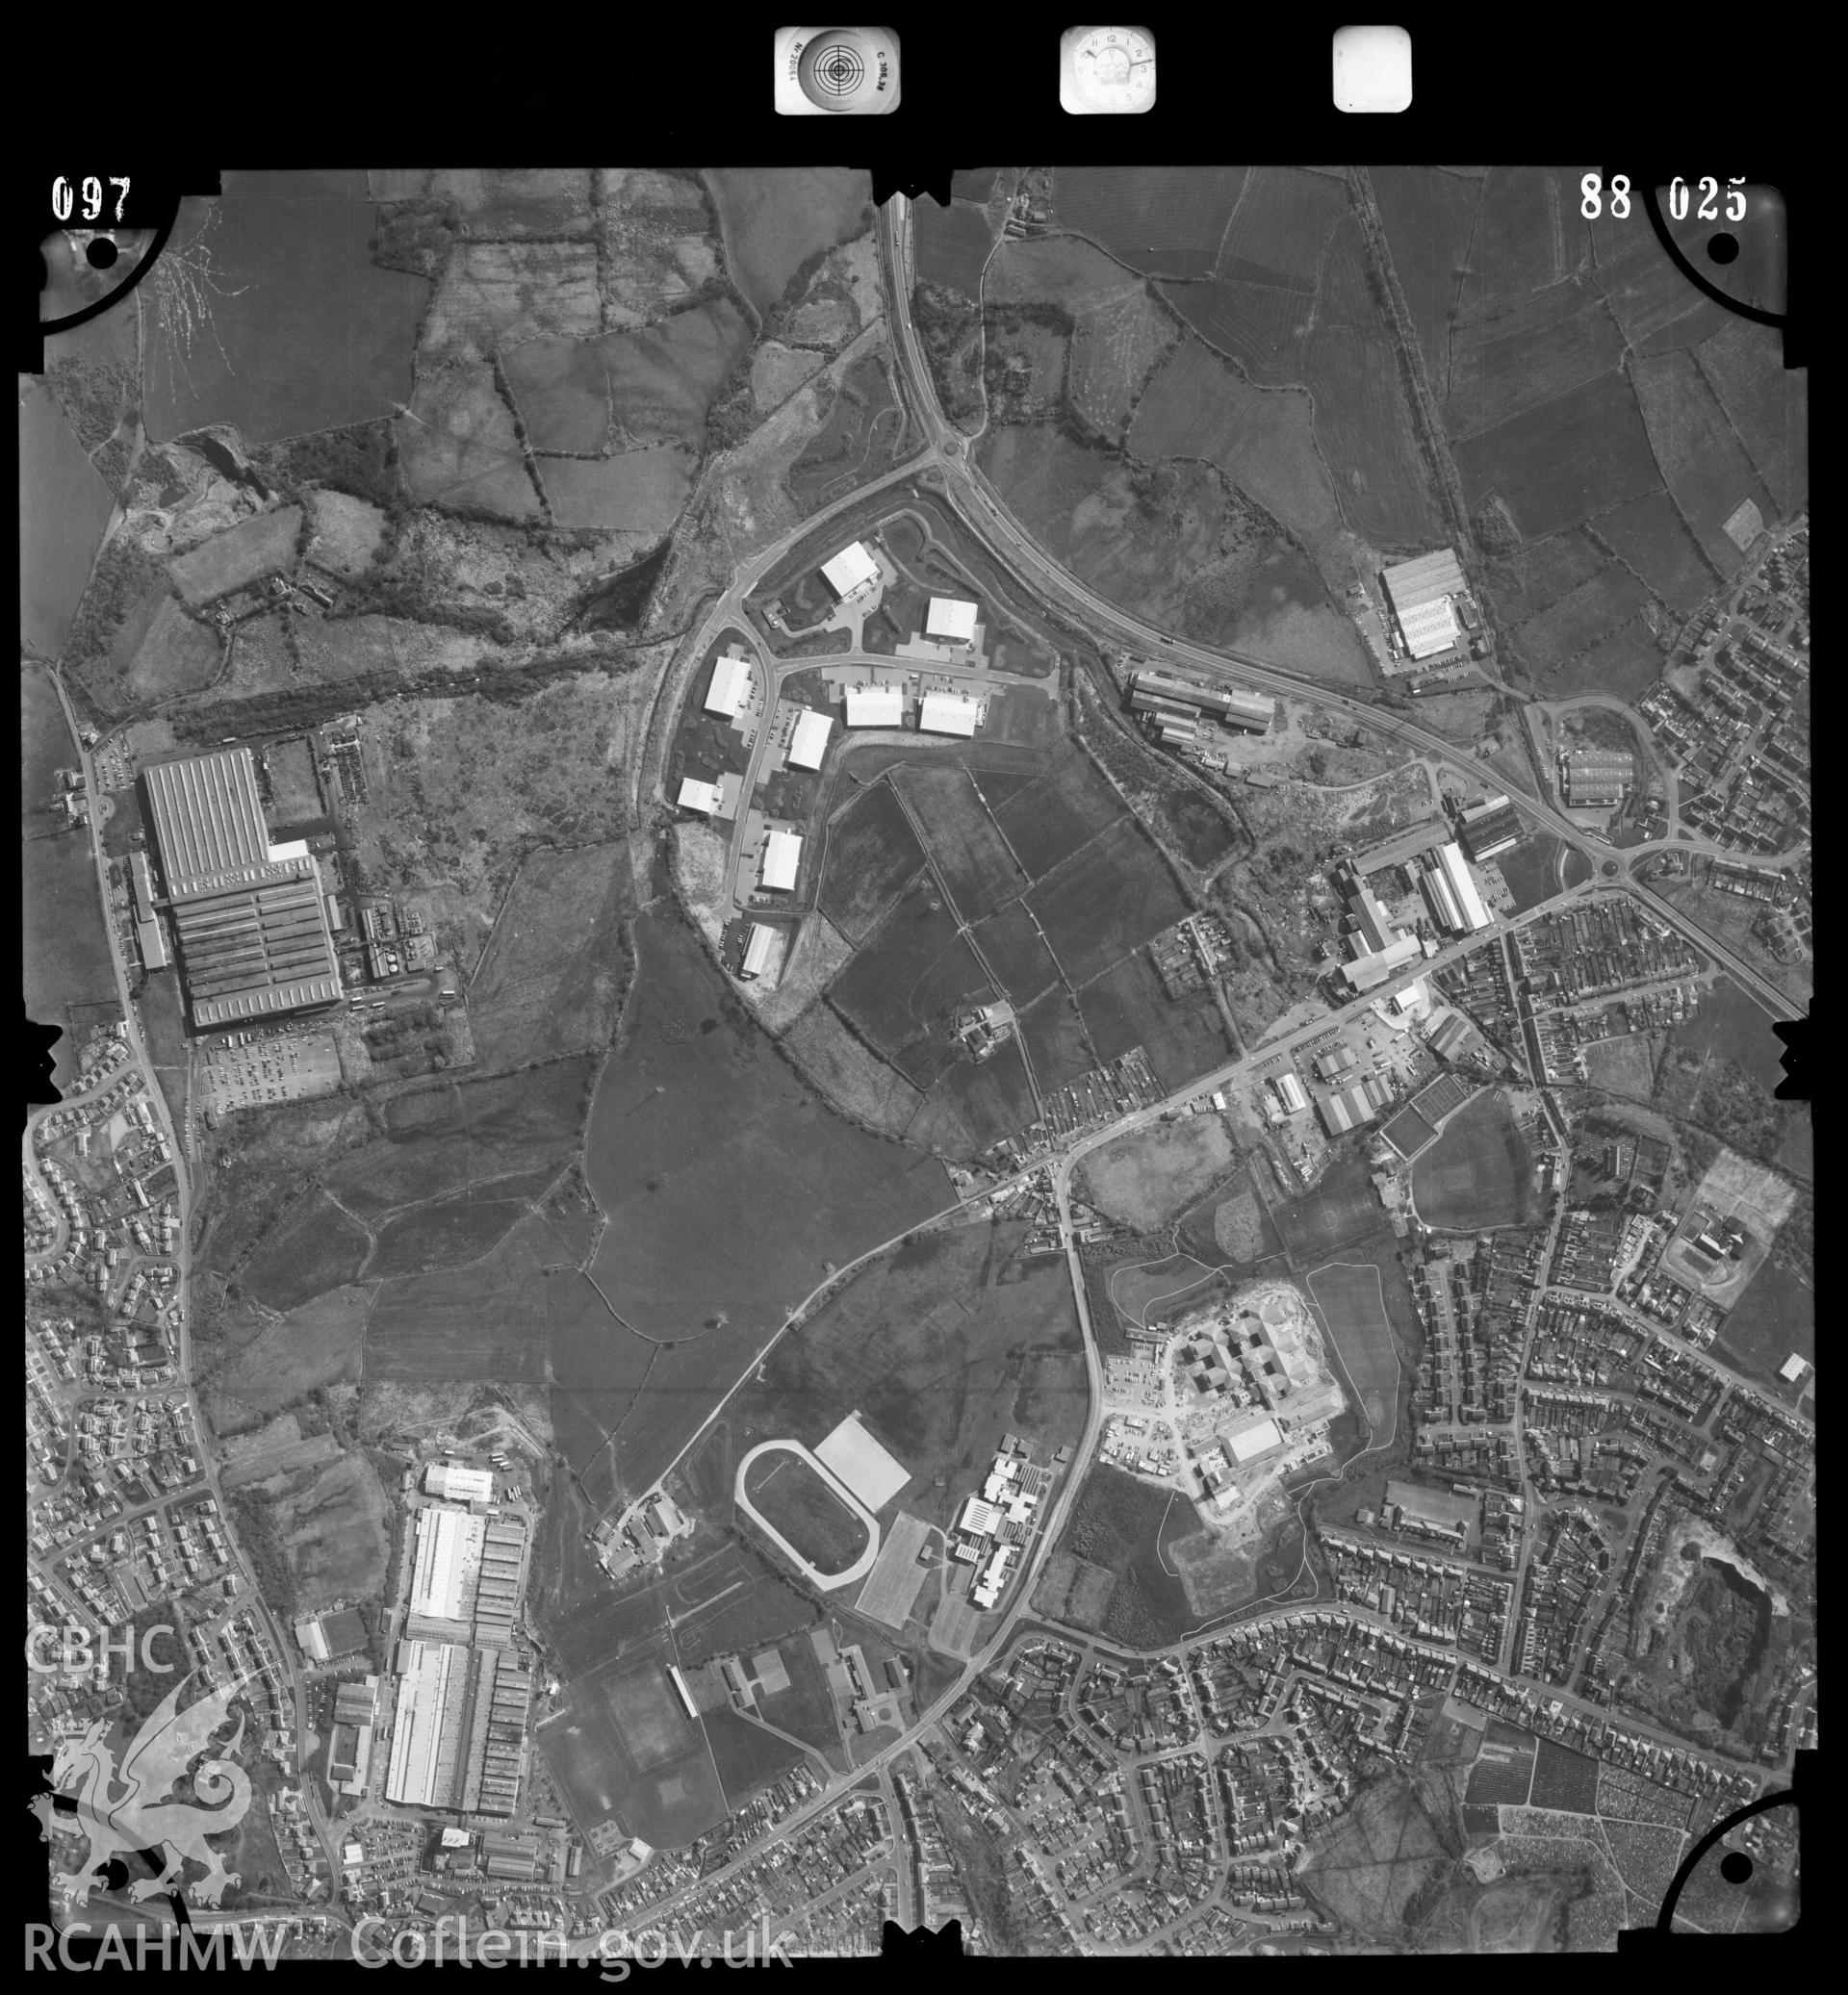 Digitized copy of an aerial photograph showing the Llanelli area taken by Ordnance Survey, 1988.